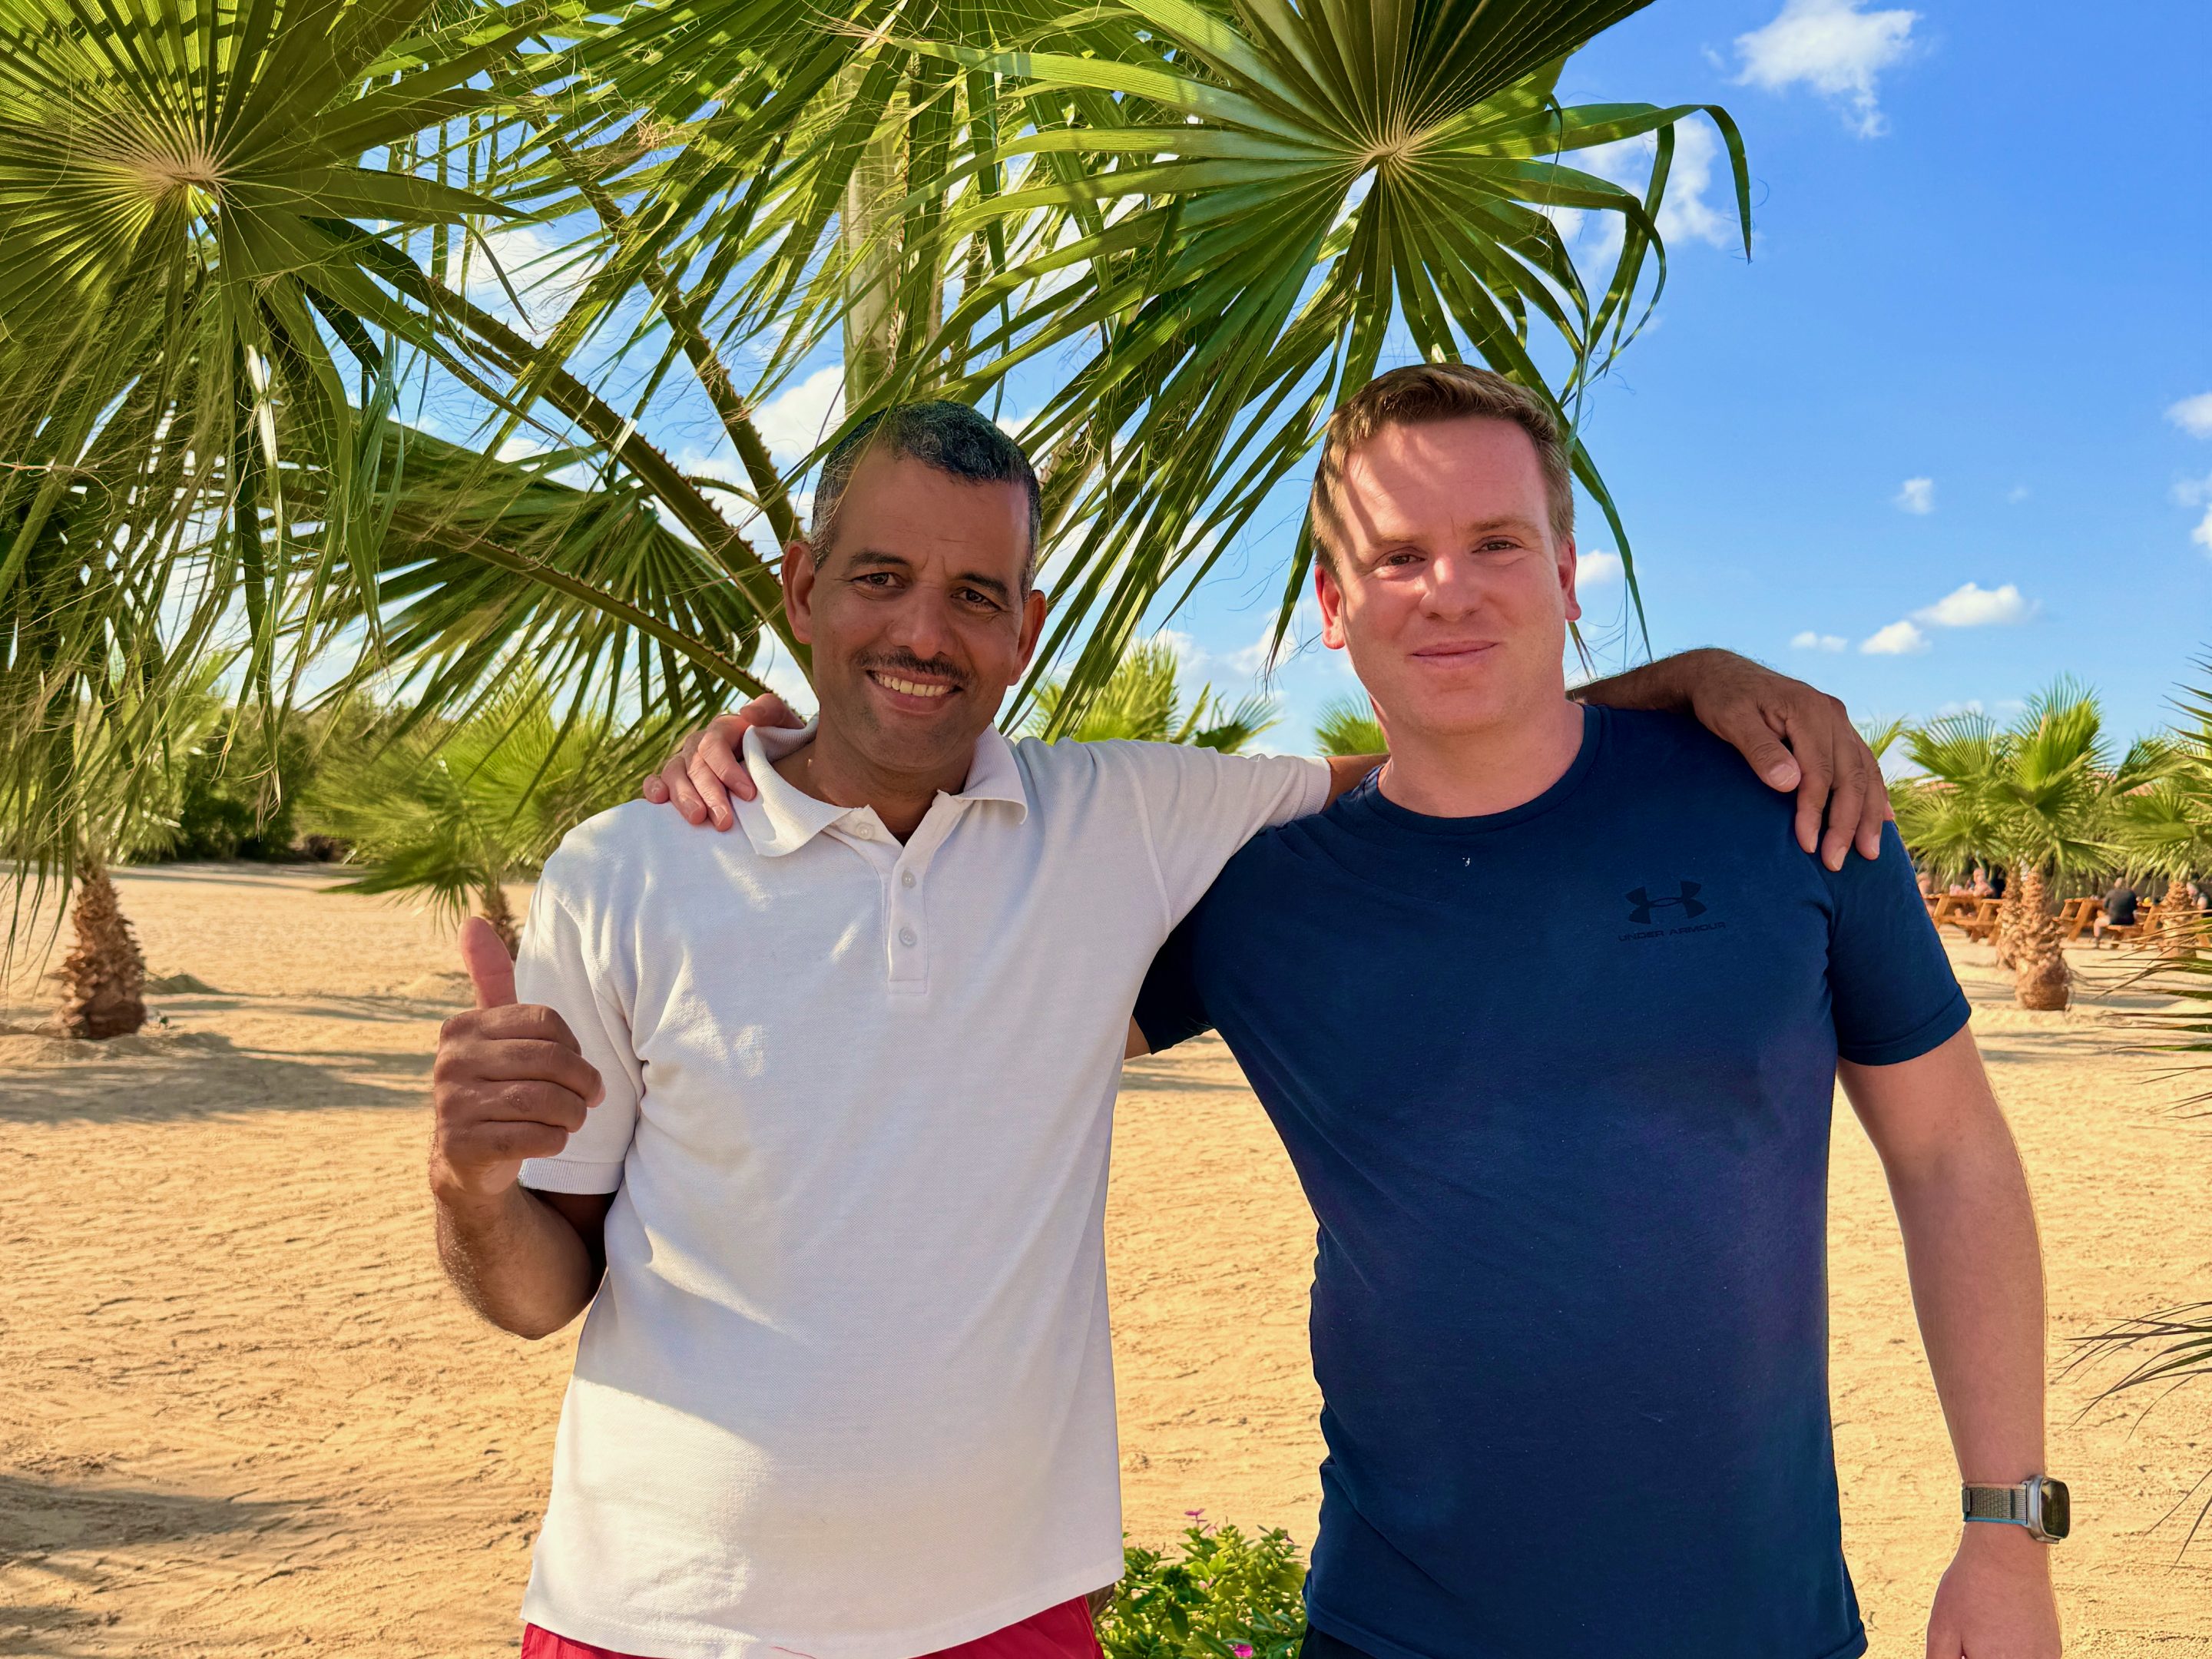 Mohamed made our vacation even better with his commitment.